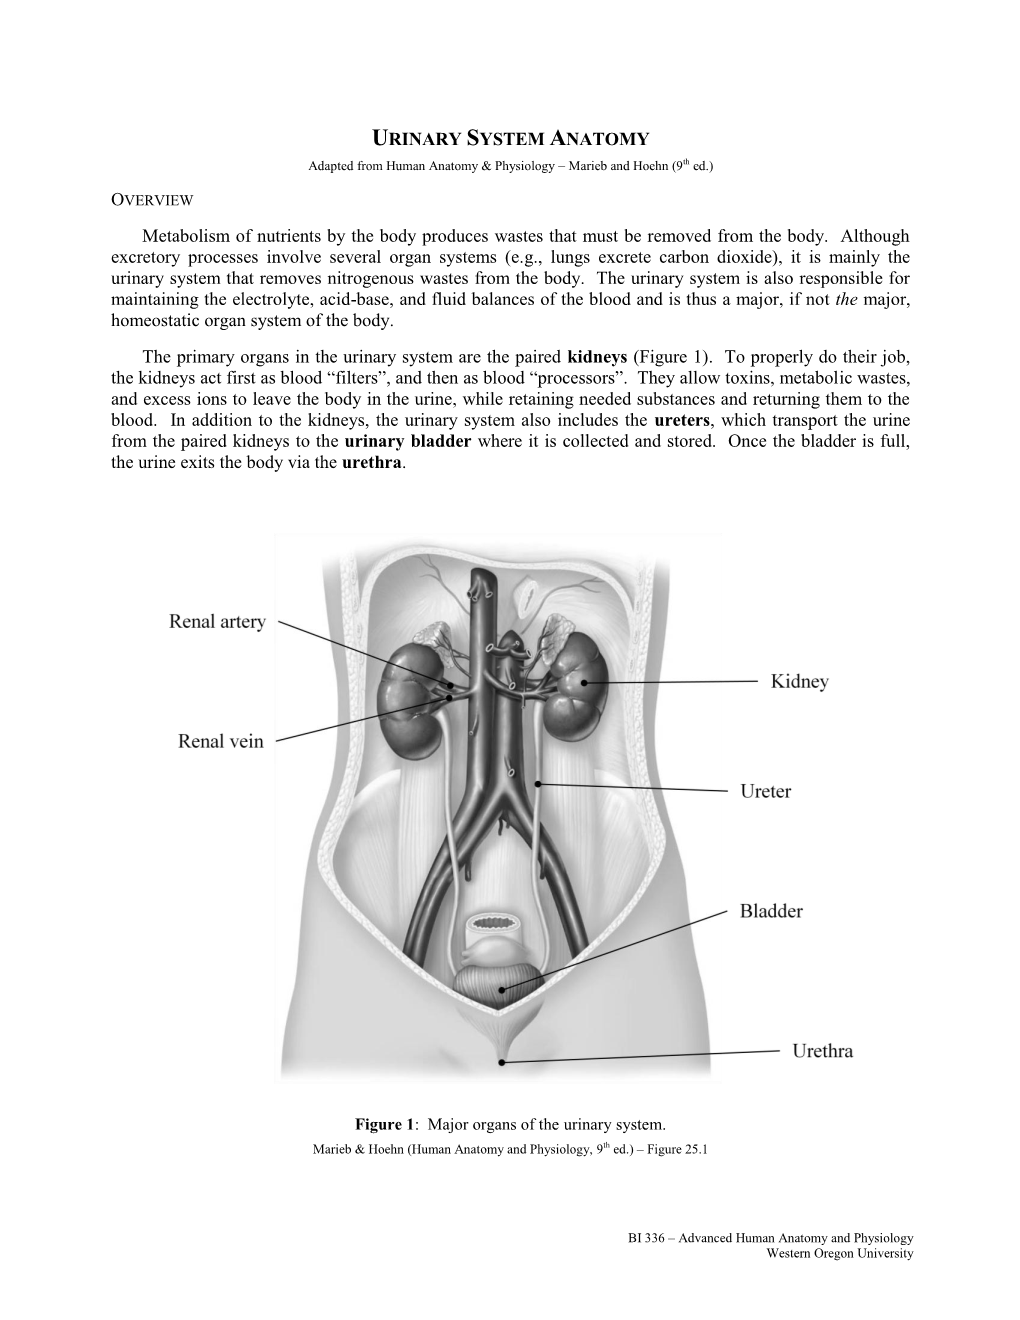 URINARY SYSTEM ANATOMY Metabolism of Nutrients by the Body